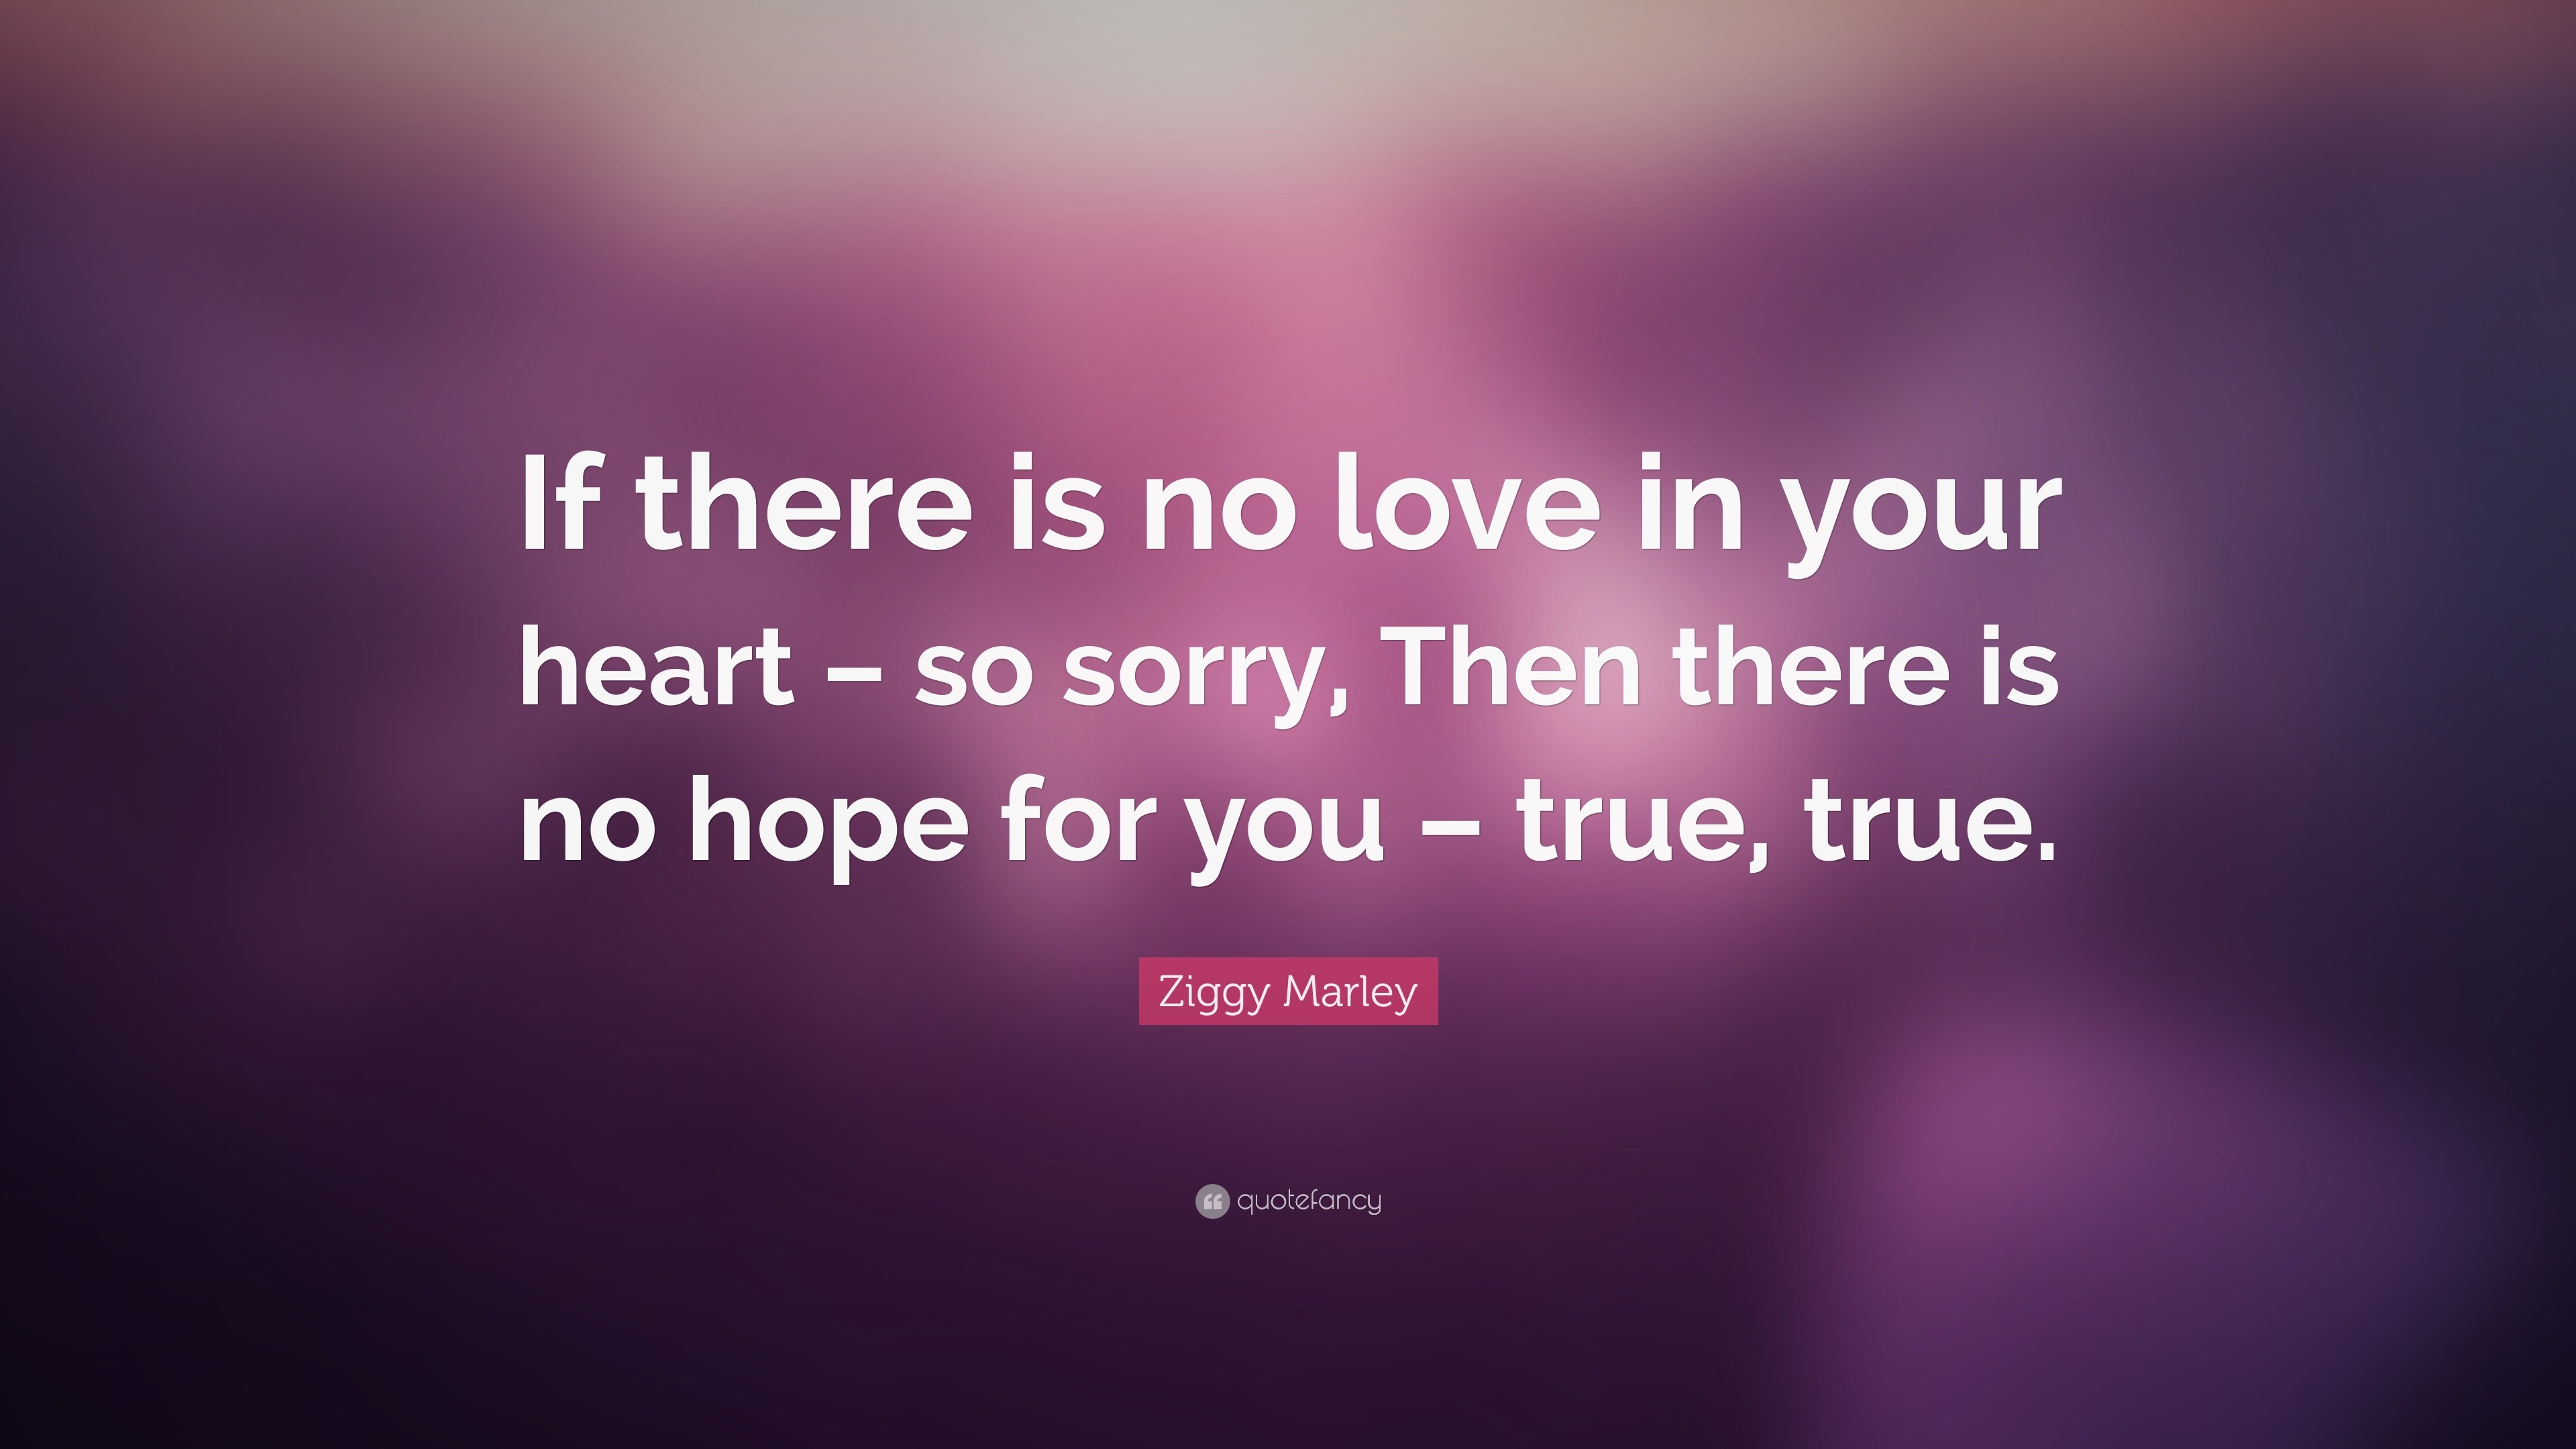 Ziggy Marley Quote “If there is no love in your heart – so sorry